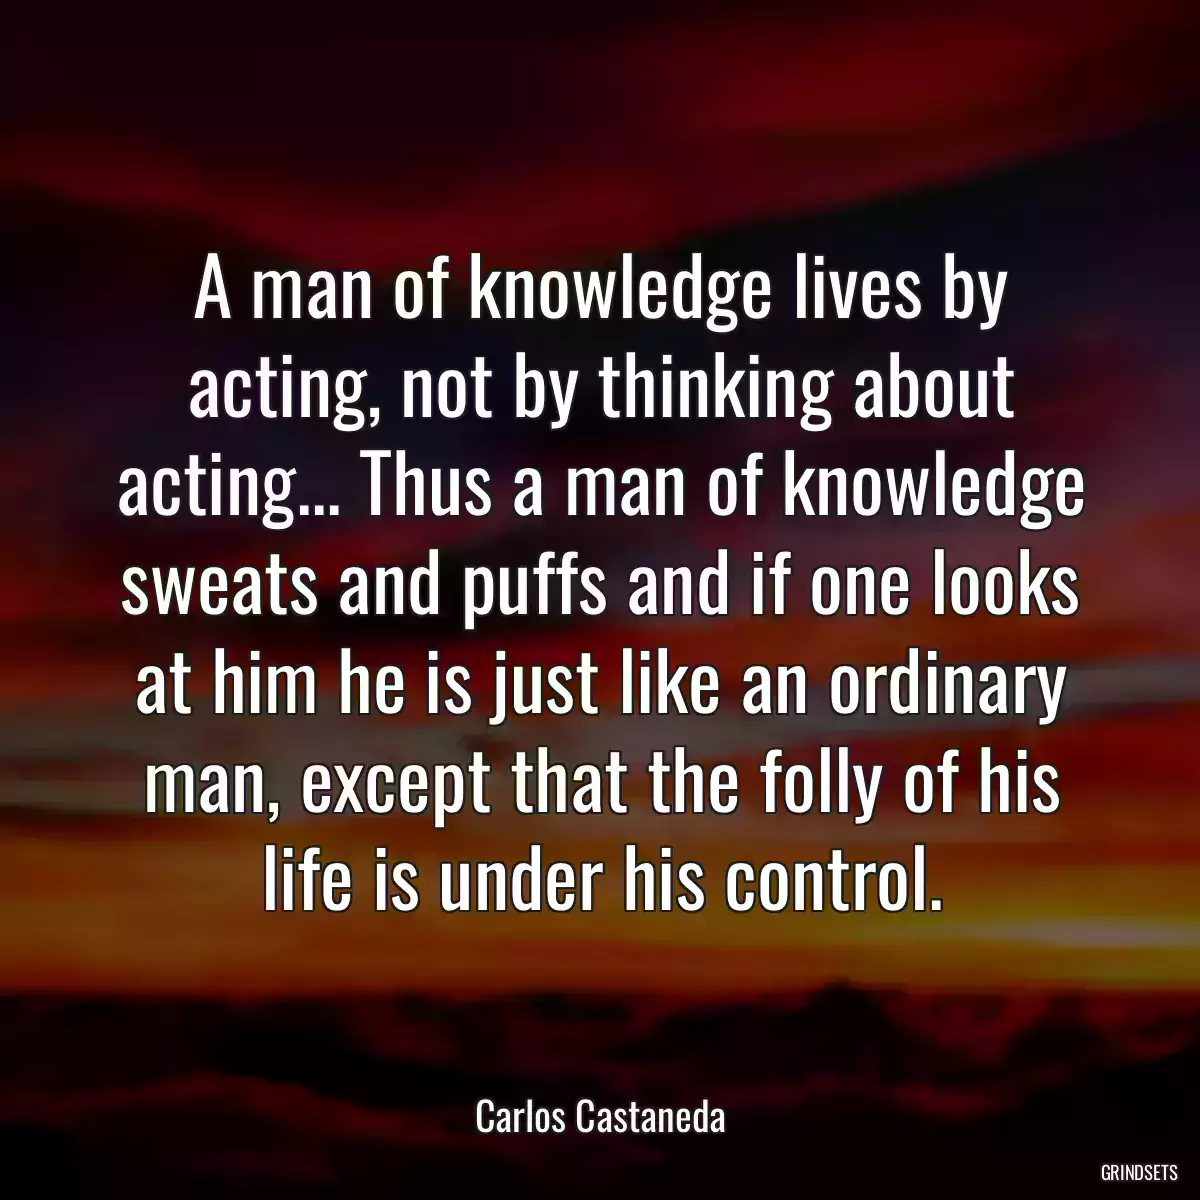 A man of knowledge lives by acting, not by thinking about acting... Thus a man of knowledge sweats and puffs and if one looks at him he is just like an ordinary man, except that the folly of his life is under his control.